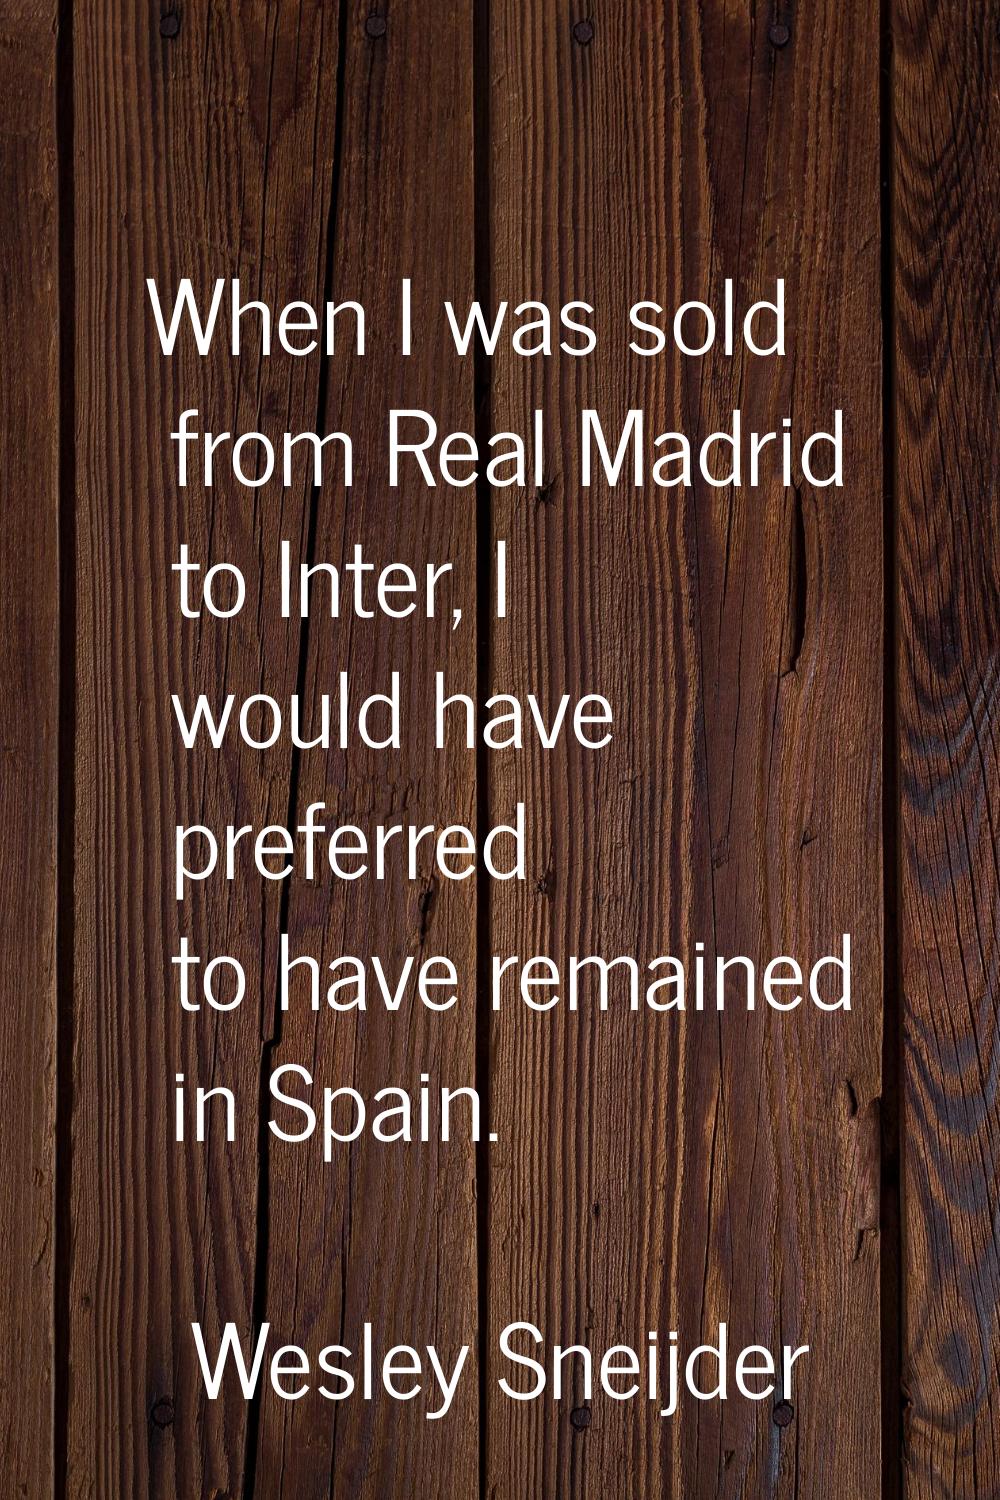 When I was sold from Real Madrid to Inter, I would have preferred to have remained in Spain.